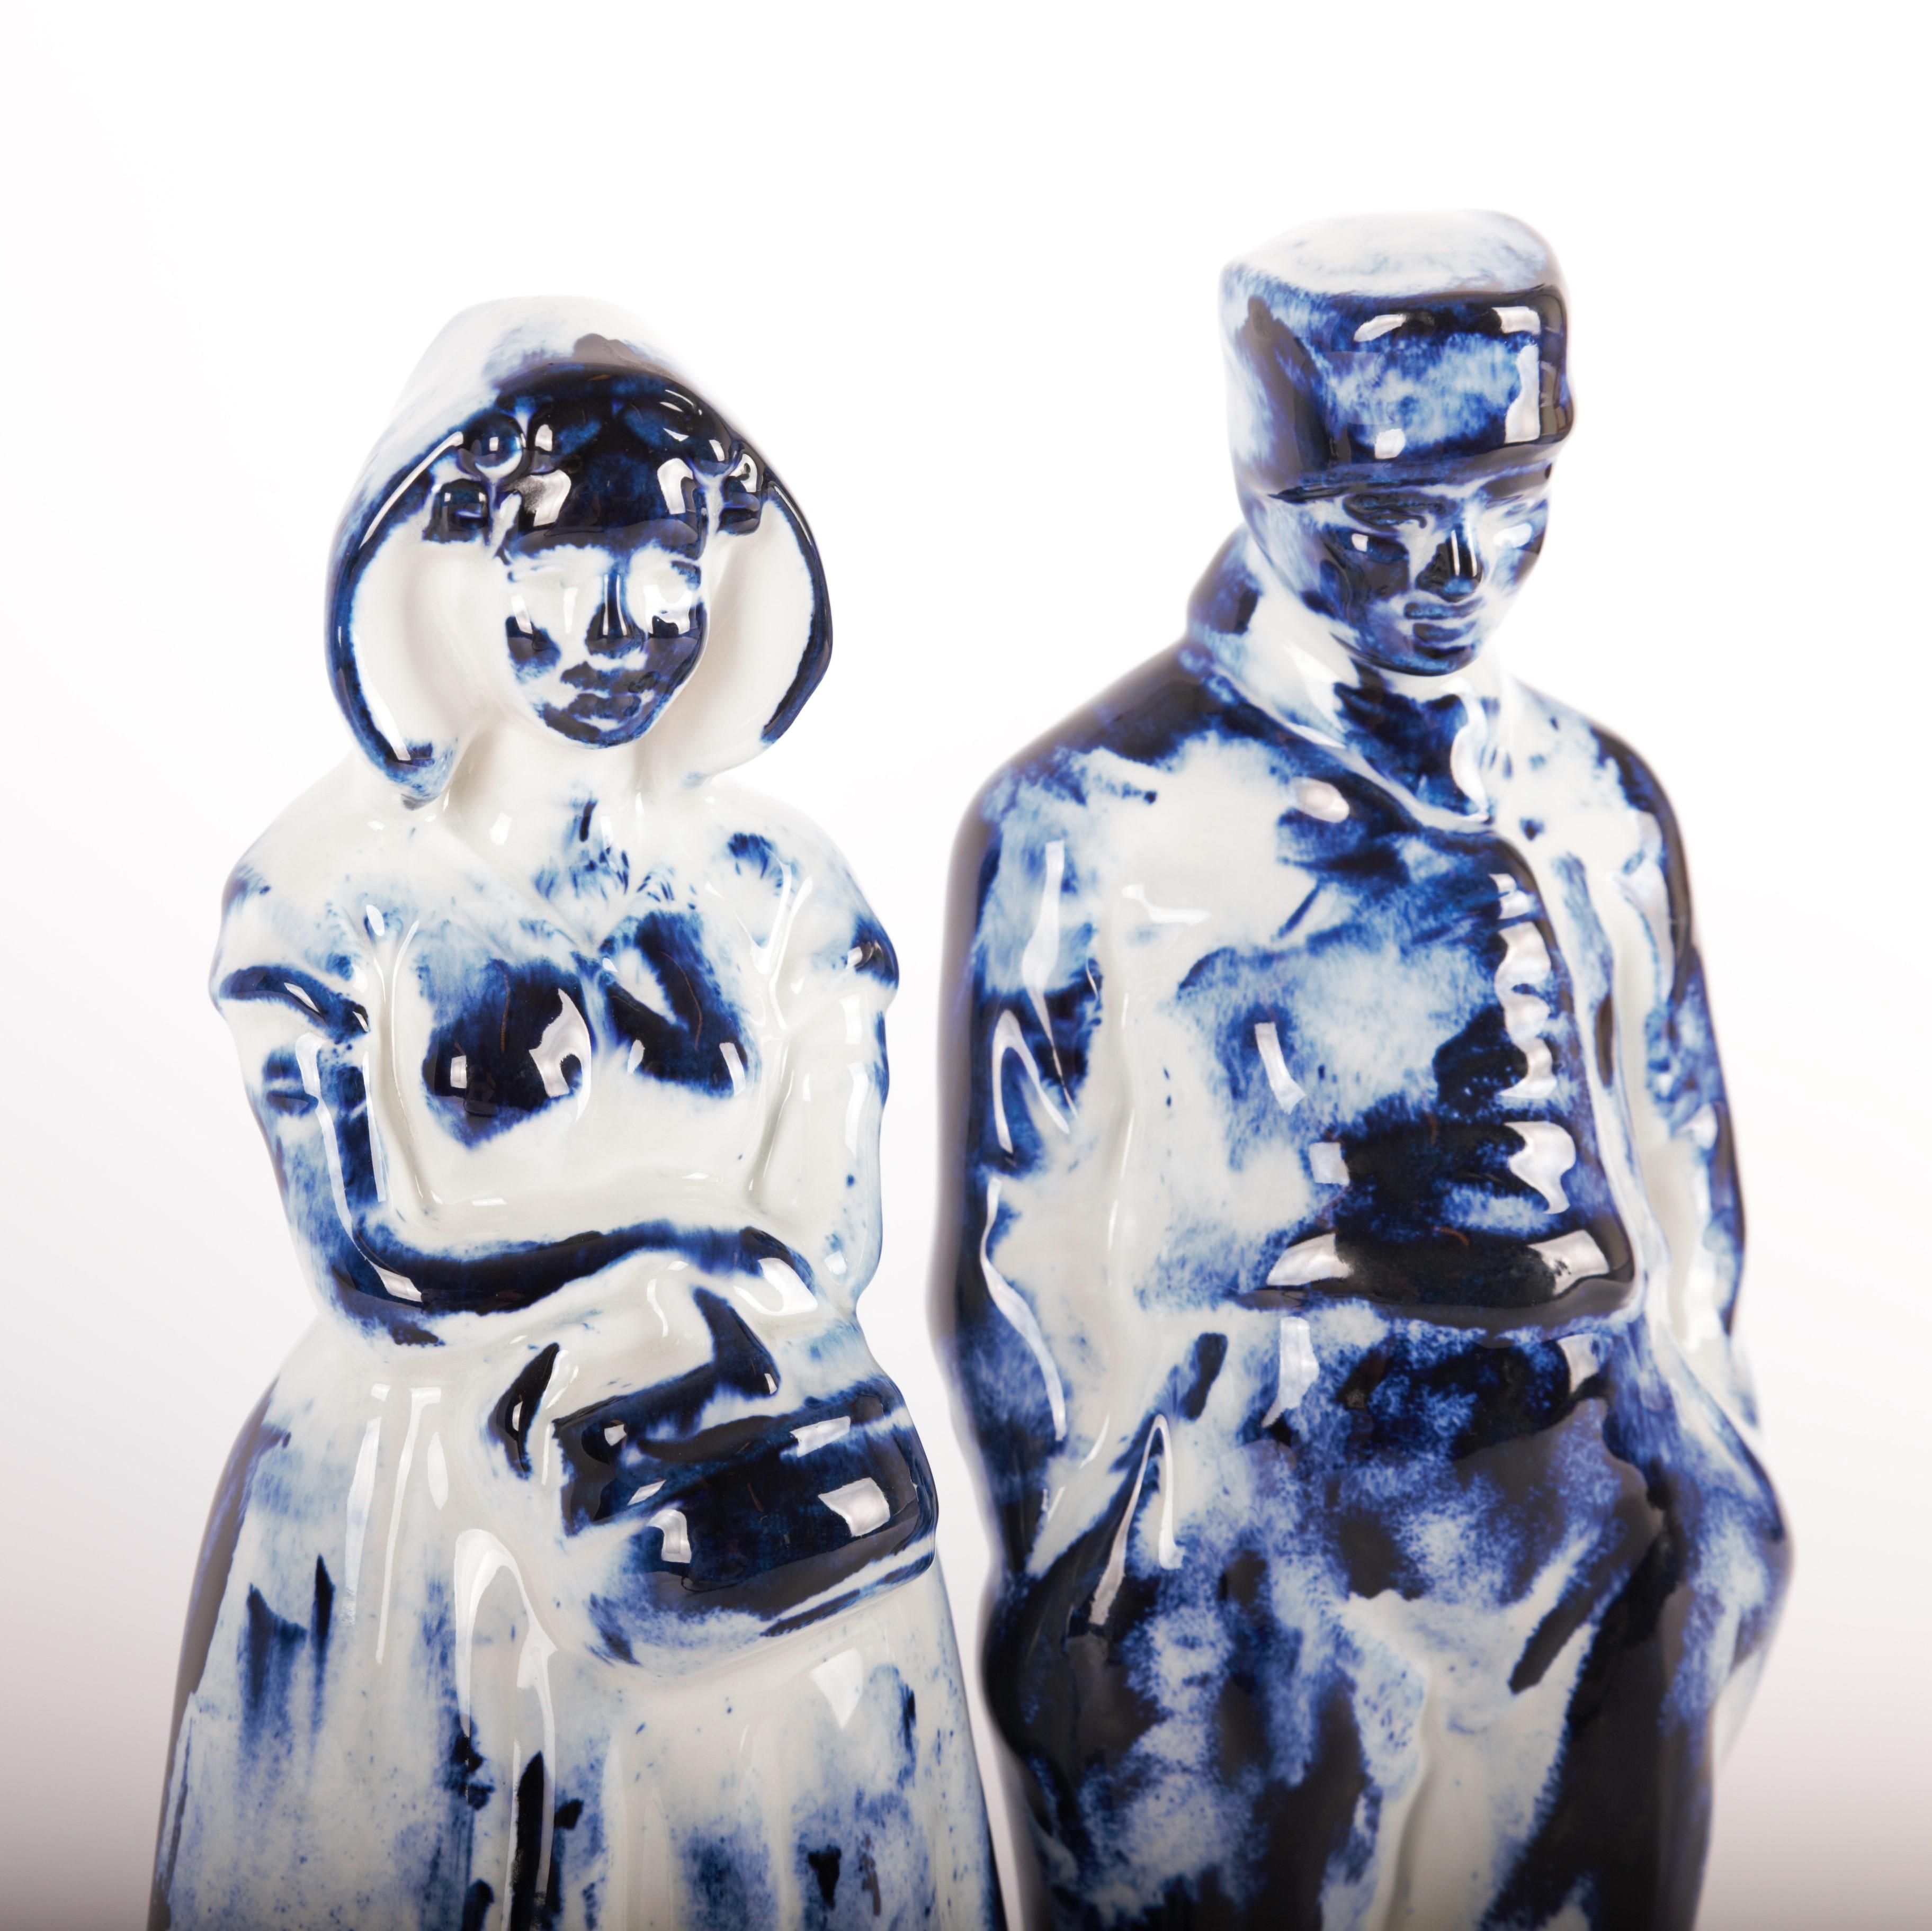 The set of One Minute Delft Blue Farmer & Farmer Wife is available as an exclusive Personal Edition, Marcel Wanders' label carrying works of a more personal and experimental nature. The pieces of the Delft Blue series are unlimited unique by